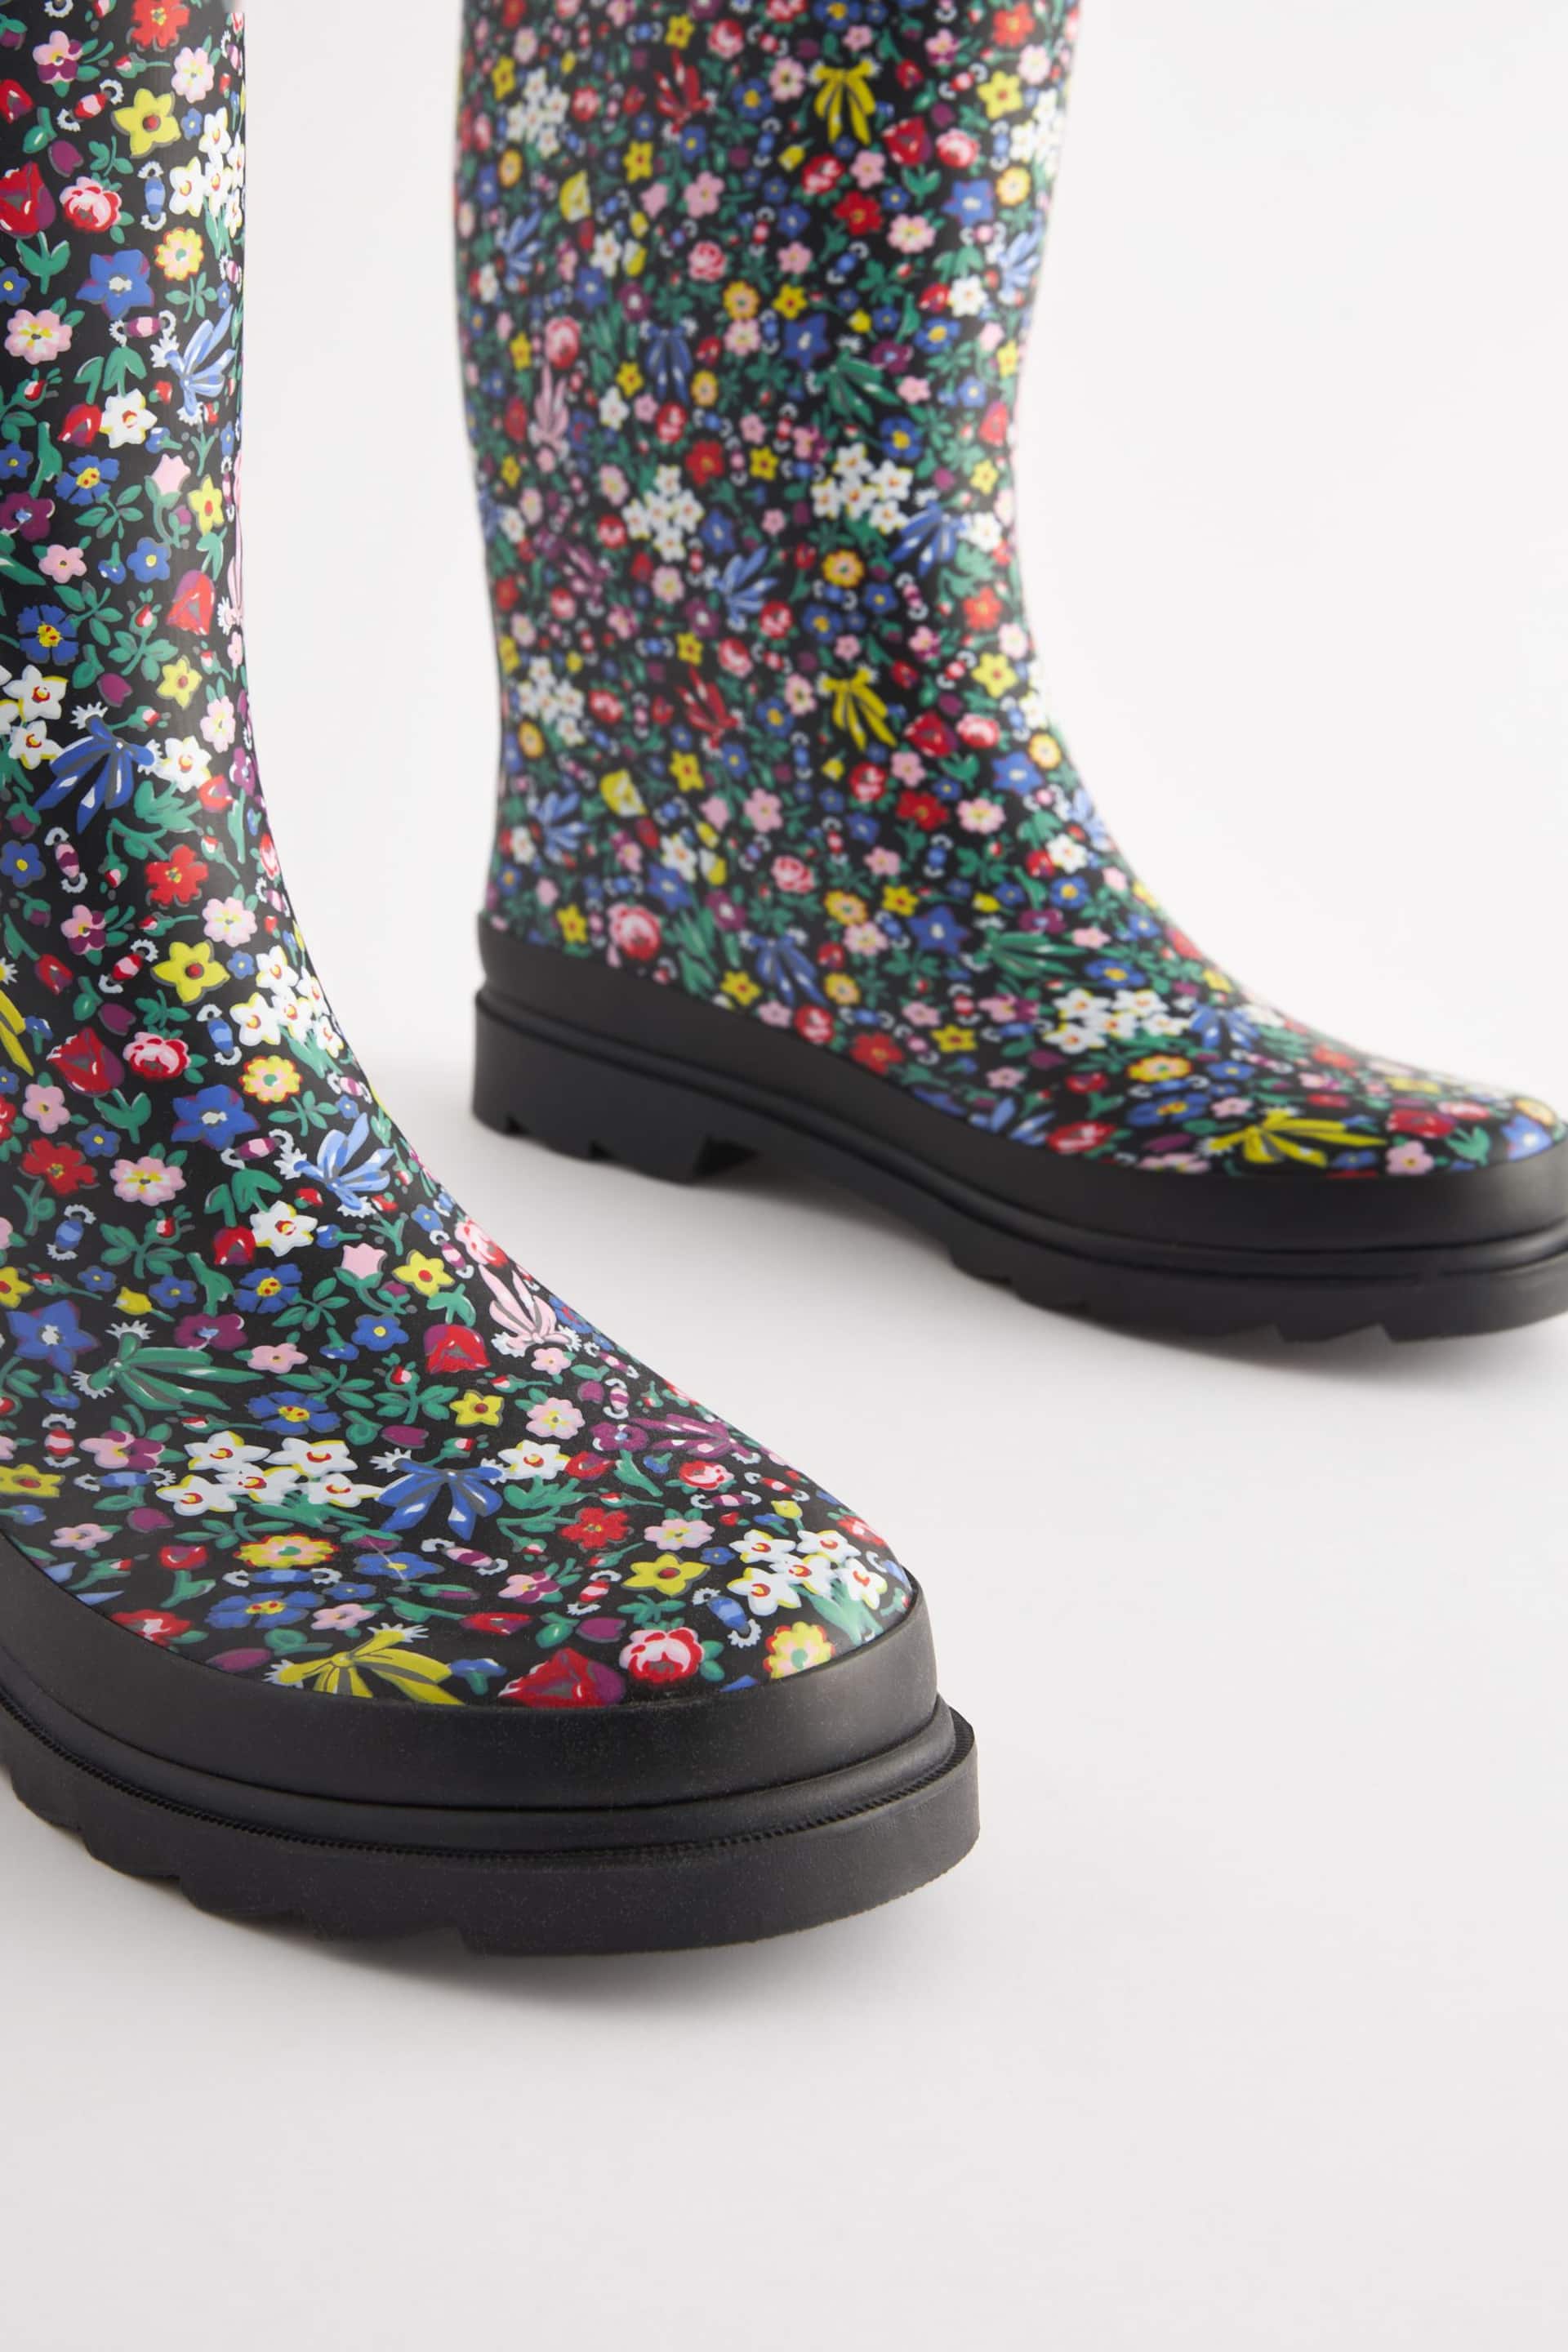 Cath Kidston Black Ditsy Floral Tall Wellies - Image 4 of 7